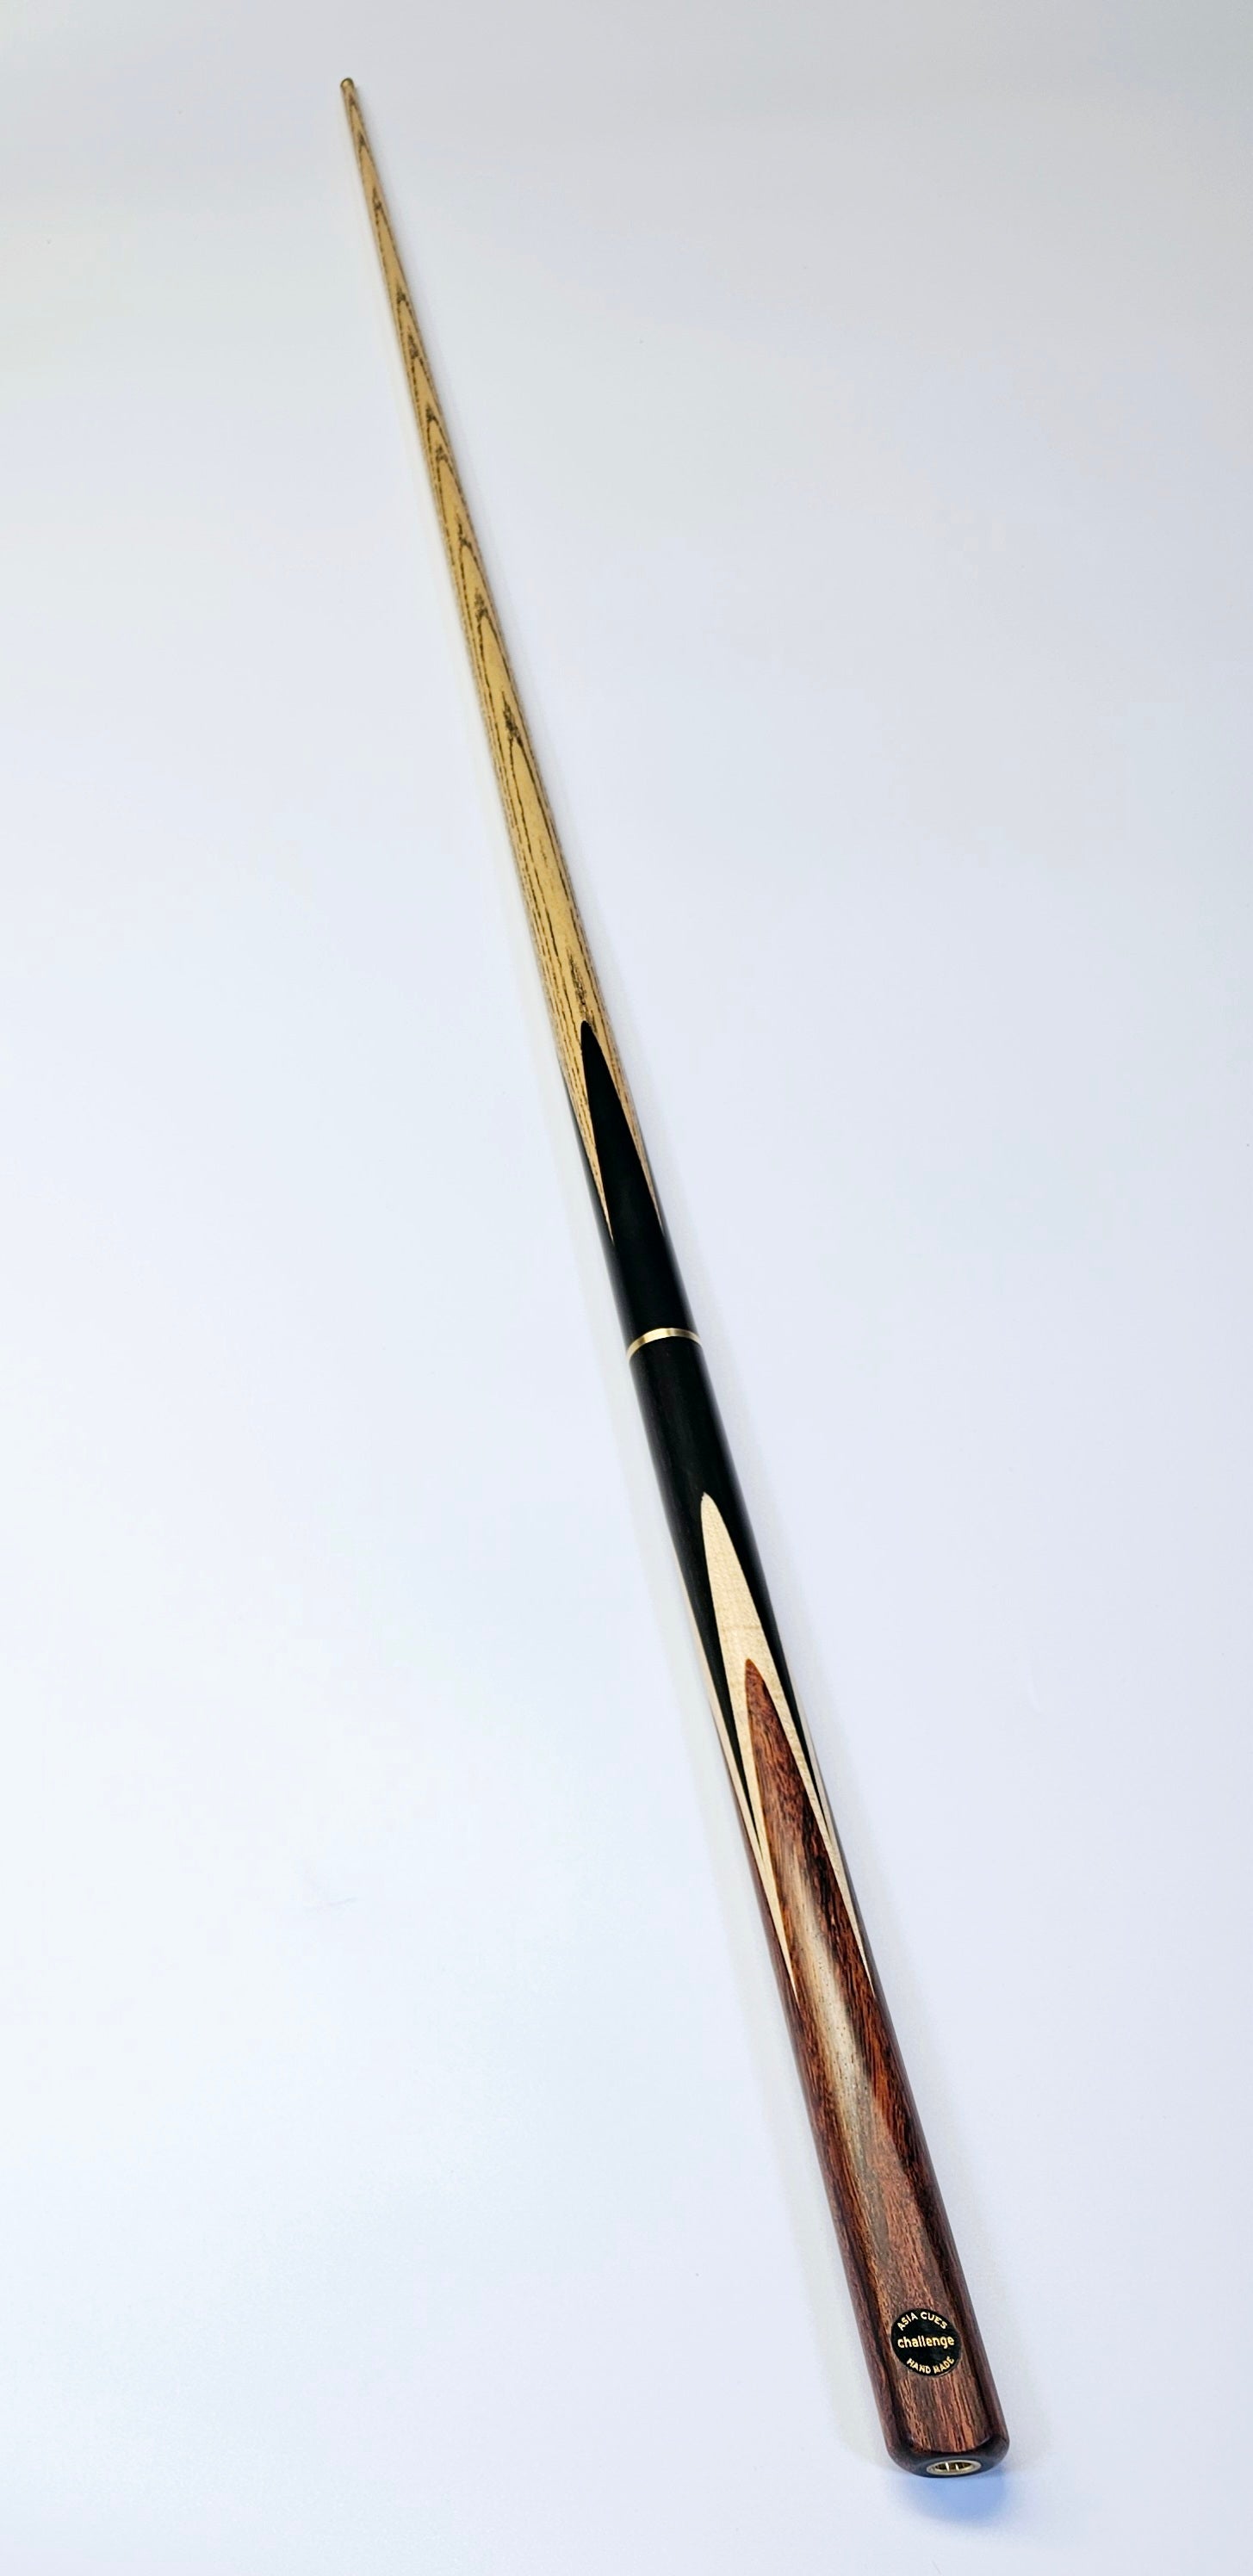 Asia Cues Challenge - 3/4 Jointed Snooker Cue 9.5mm Tip, 18.1oz, 57"